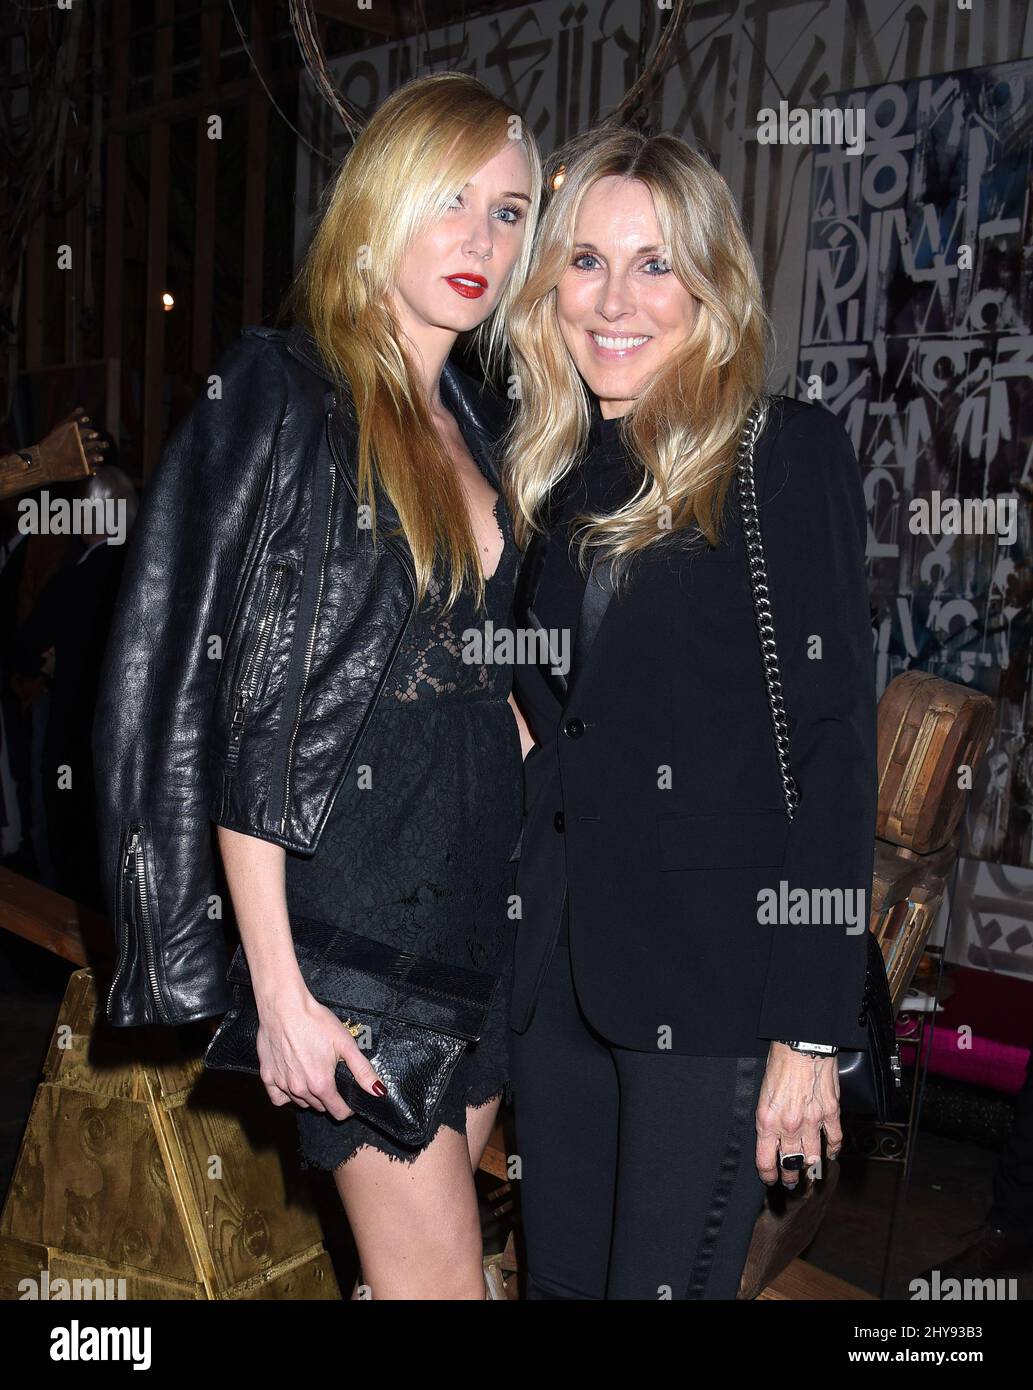 Kimberly Stewart and Alana Stewart attends the Bubbles and Baubles at Church Boutique for the designer and a celebration of the newest red carpet worth releases of shades Stock Photo